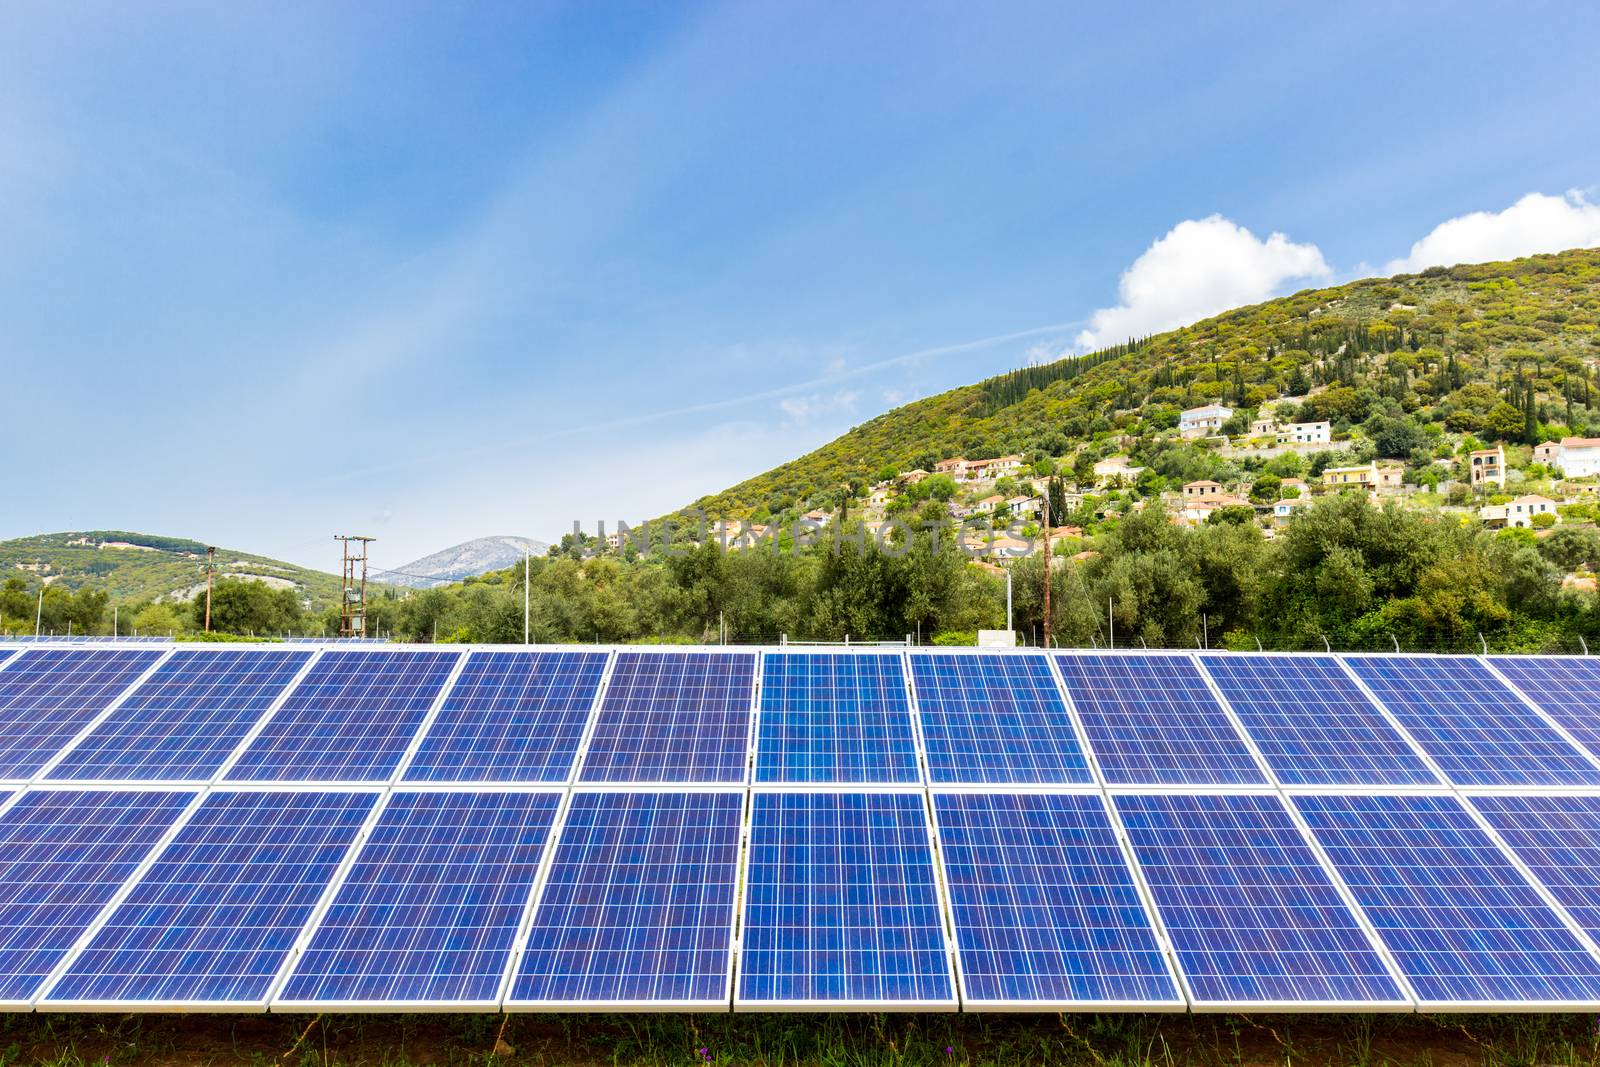 Row of blue solar collectors near greek town on mountain